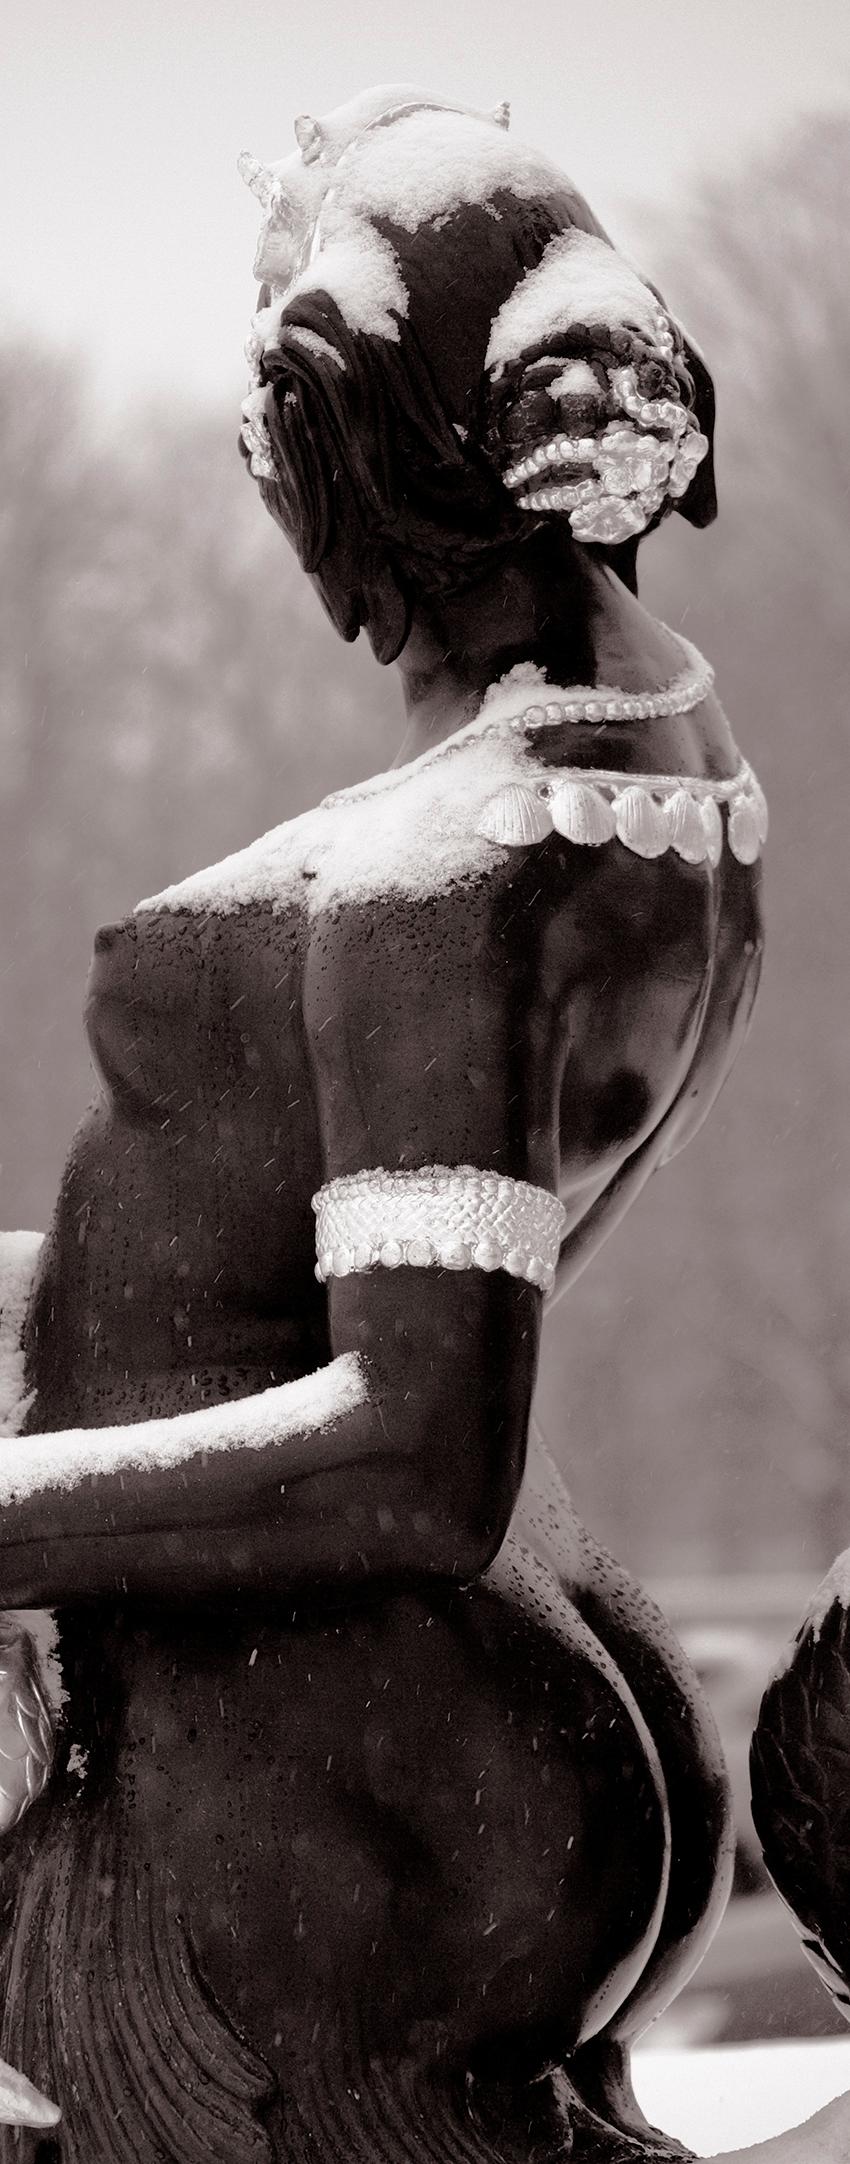 The french duchess - Limited edition pigment print  -   Limited Editions of 5
Sculpture of a naked woman covered in snow in the Tuileries gardens in Paris, France, 2005
Jardins des Tuileries

Signed + numbered by artist with certificate of